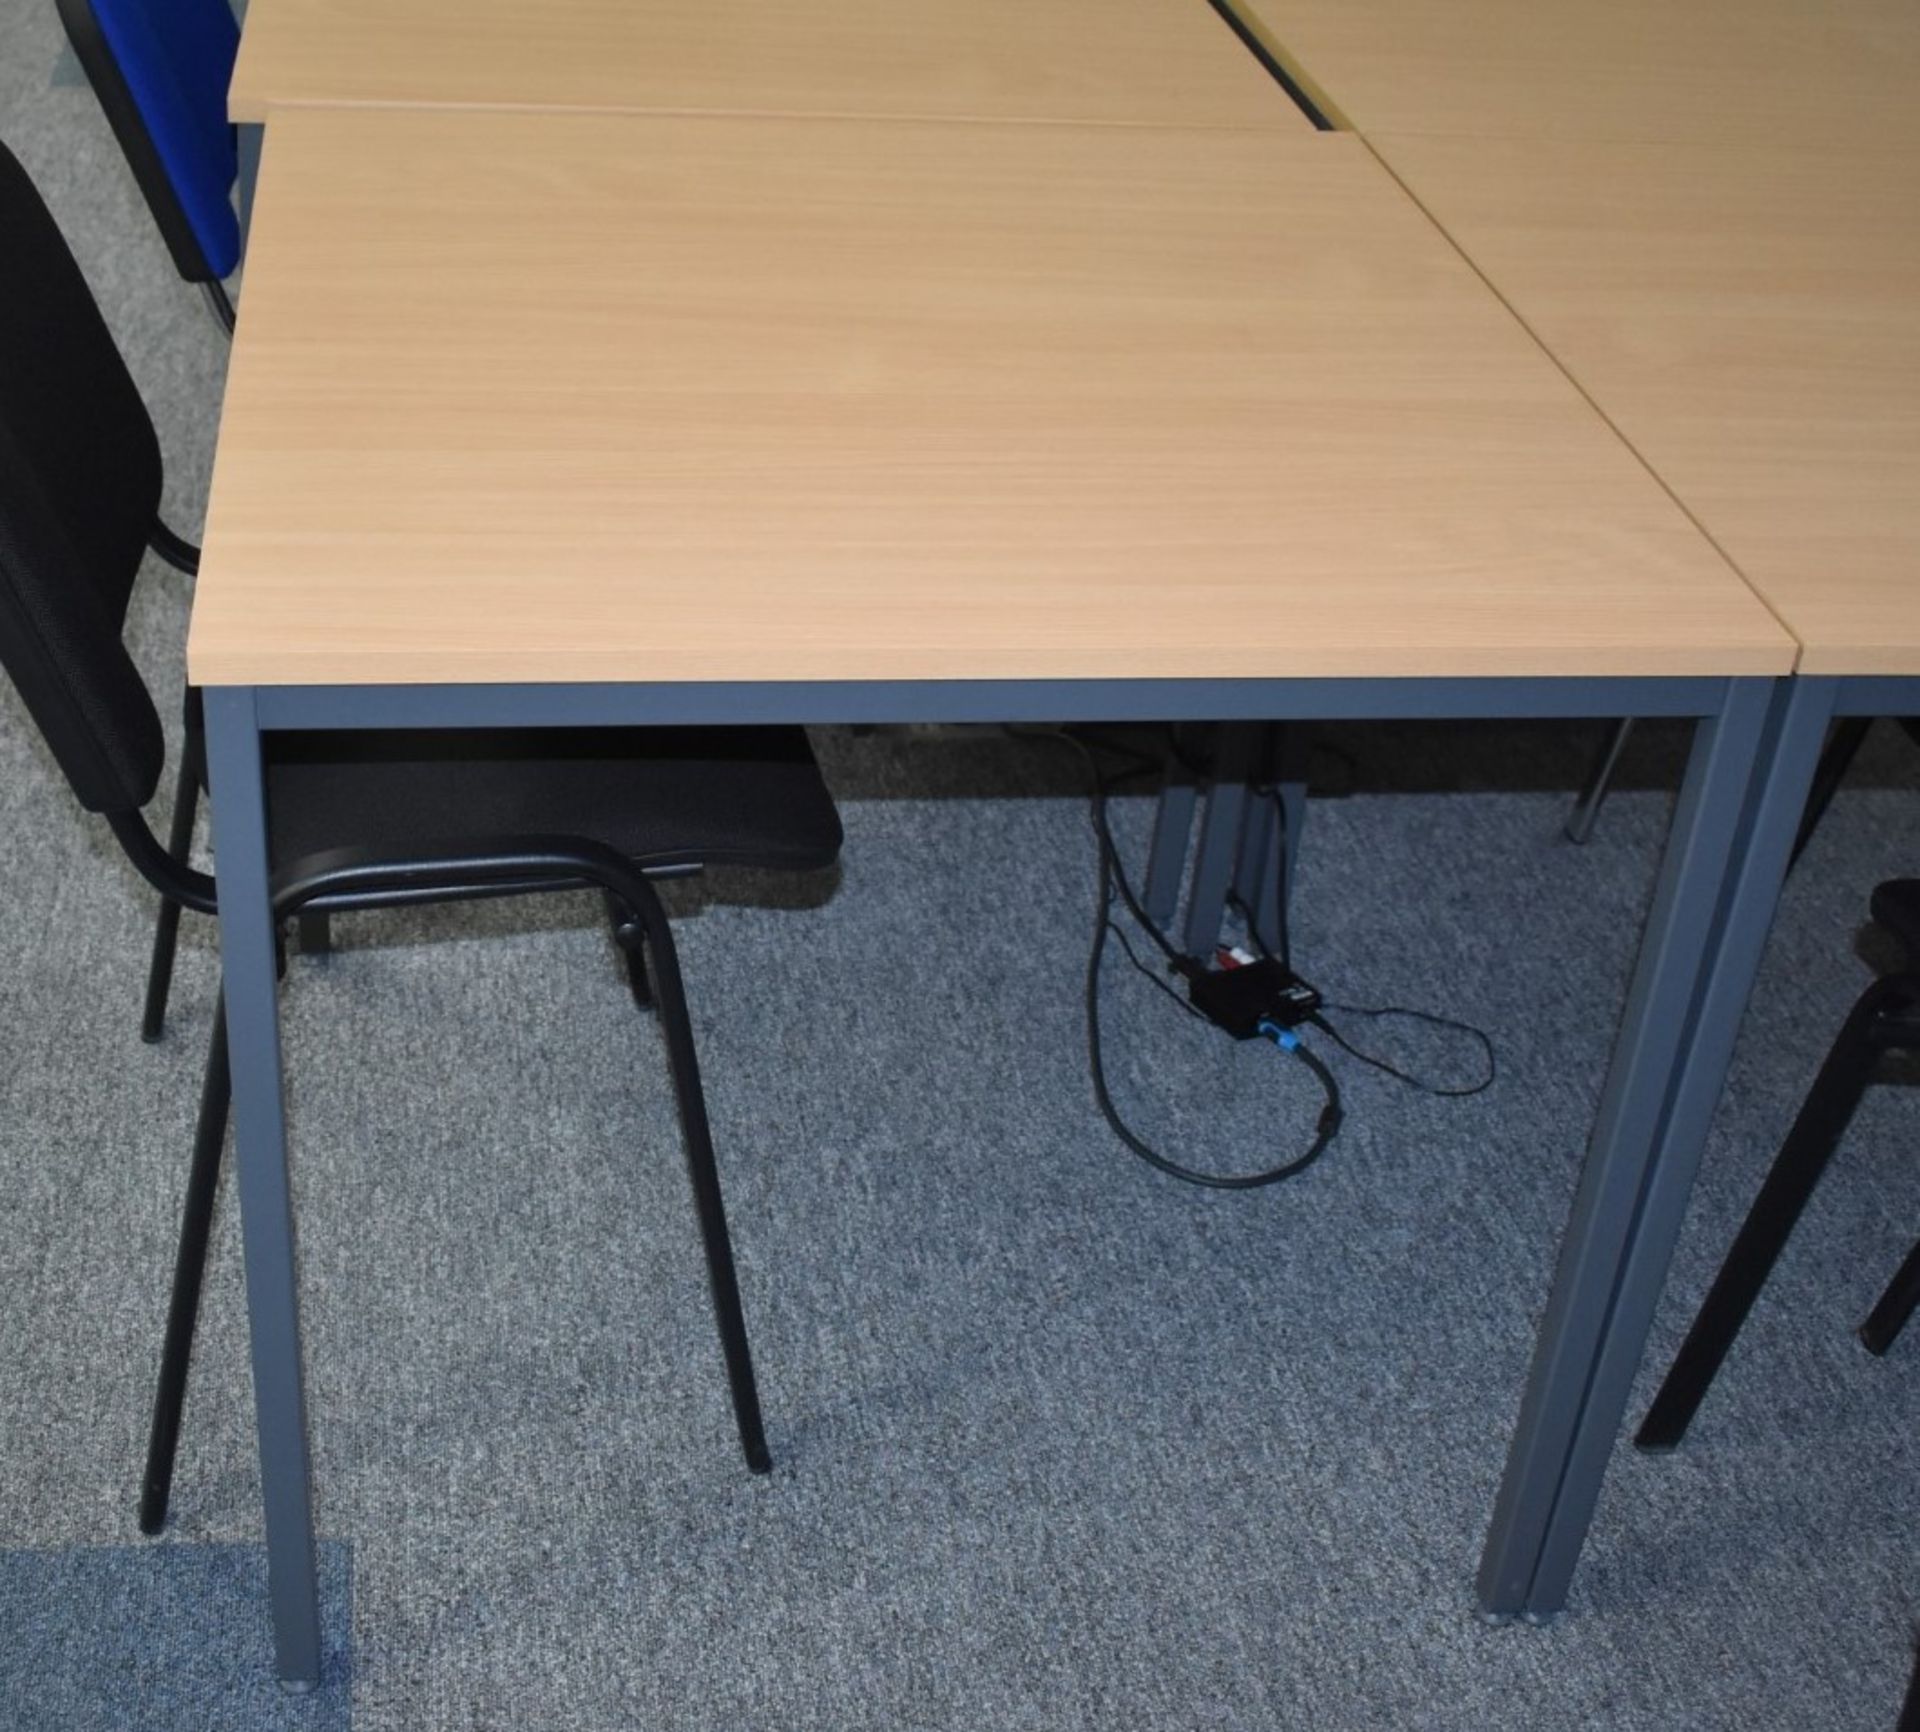 7 x Matching Office Tables With Beech Tops and Dark Grey Bases - CL490 - Location: Putney, London, - Image 3 of 4